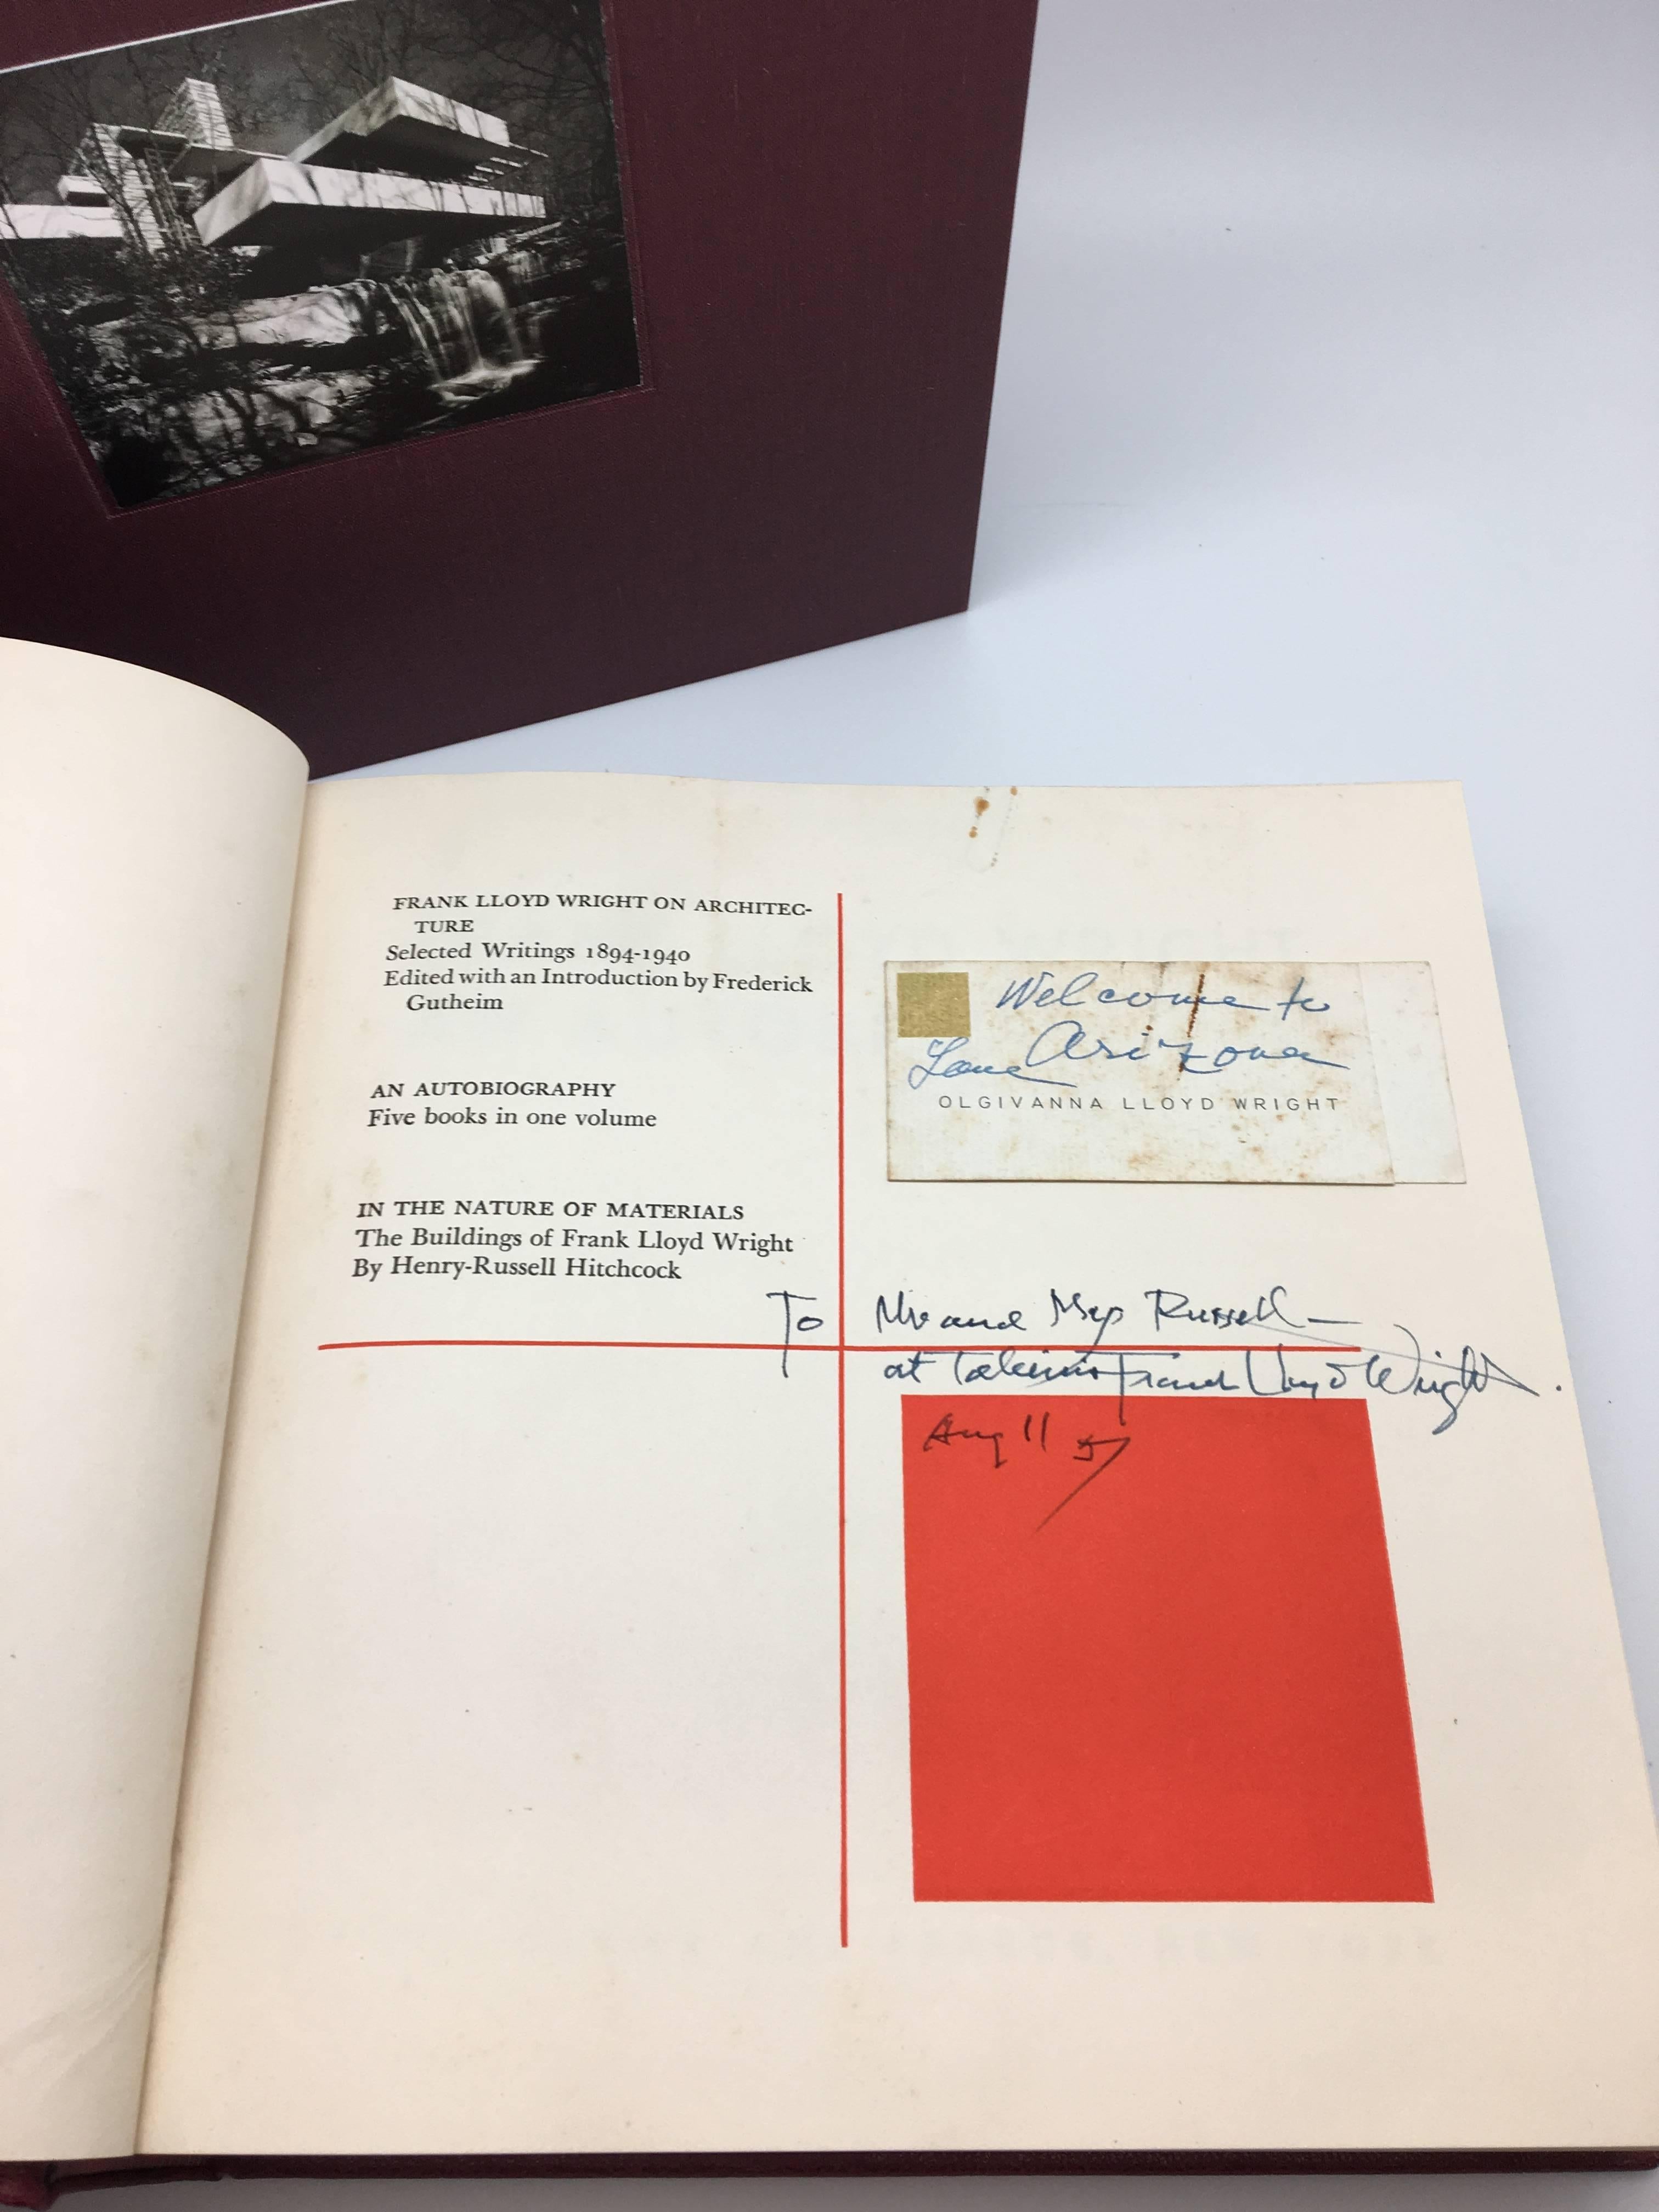 Stunning inscribed and signed copy of Frank Lloyd Wright's Autobiography presented as five books in one volume. Additionally, this omnibus volume includes Frank Lloyd on Architecture, Selected Writings 1894-1940. 

This amazing tome is inscribed